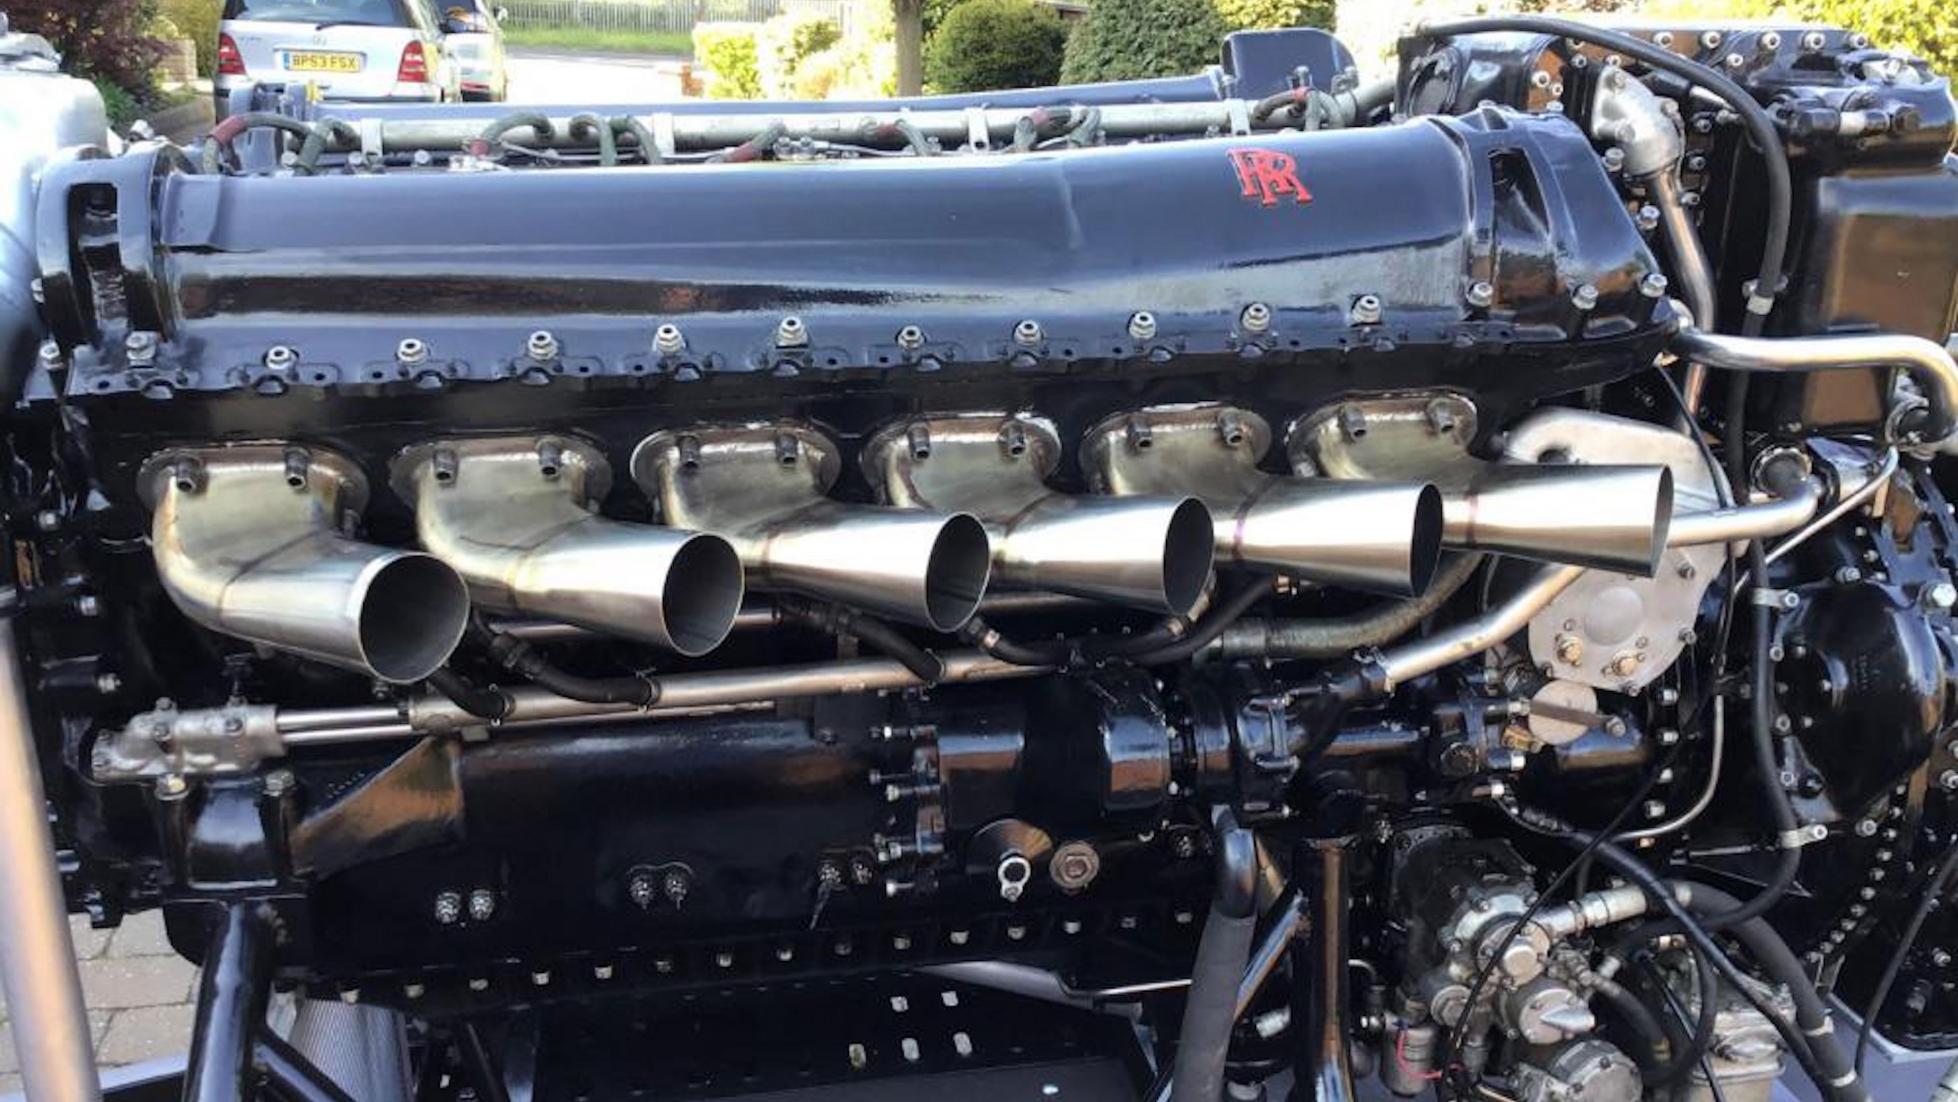 What car would you put this 1,760bhp Spitfire engine into?